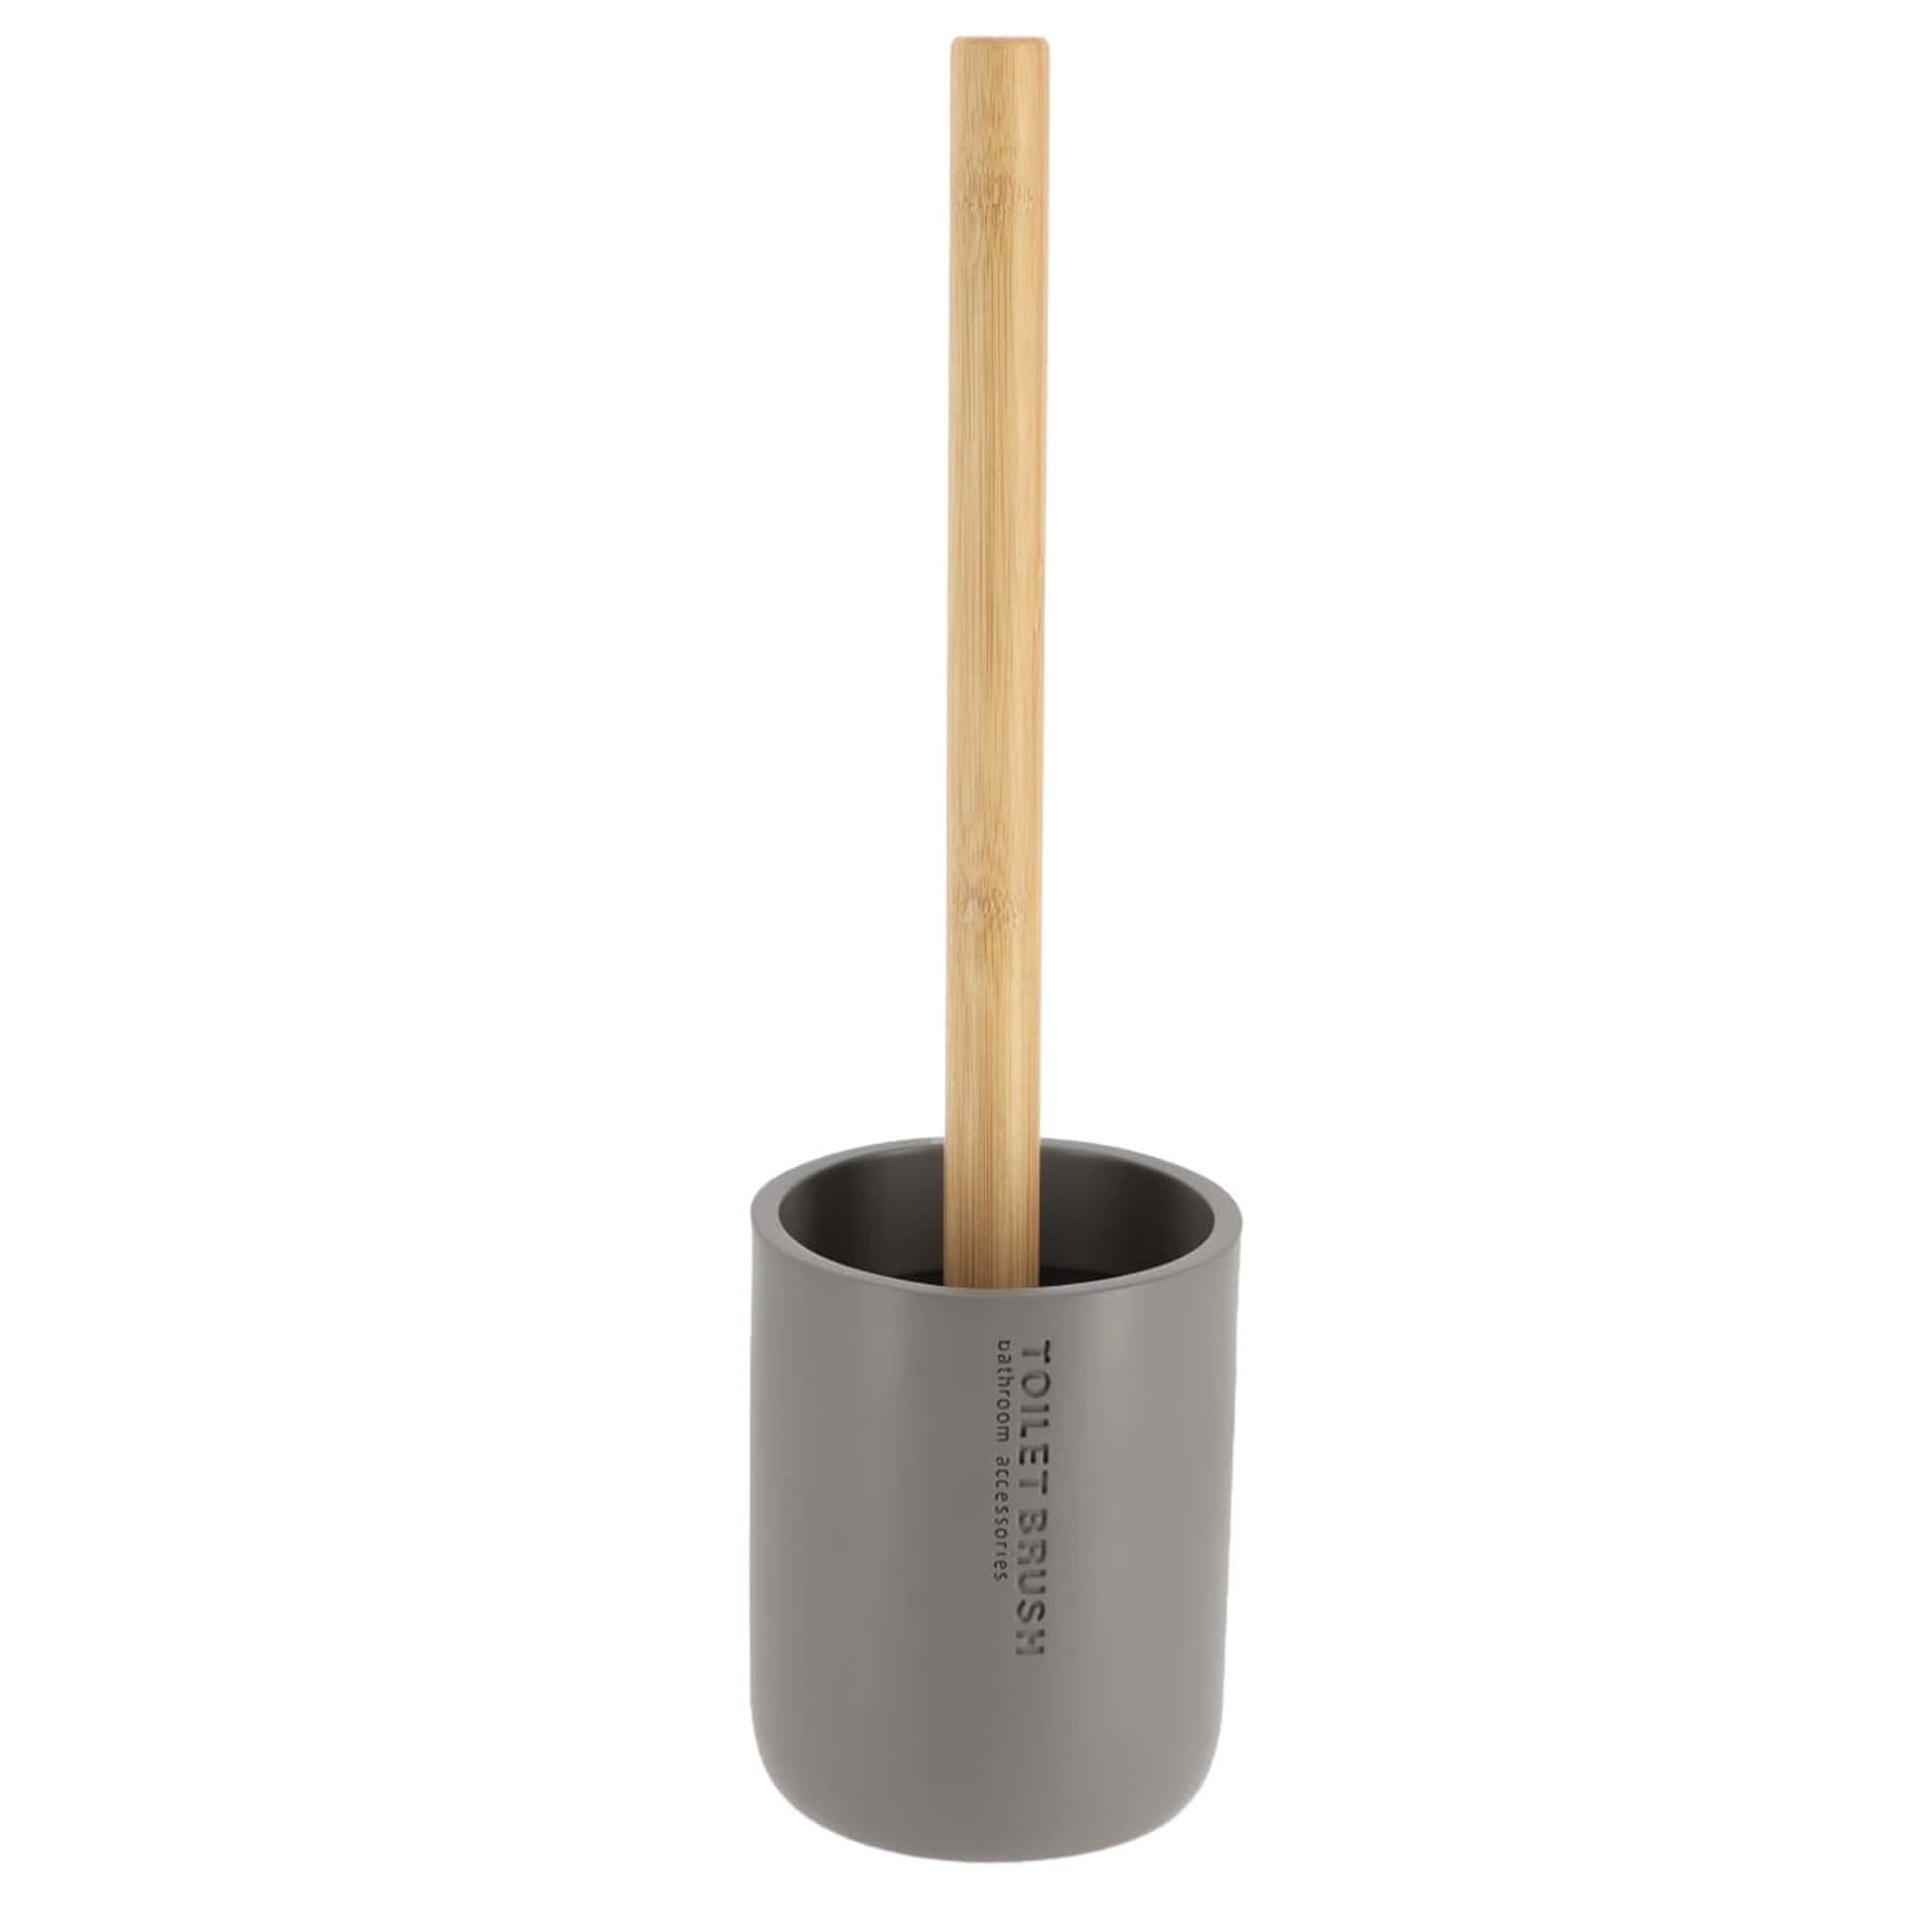 Modern Matte Gray Toilet Brush Set with Natural Bamboo Handle Polyresin Bathroom Cleaning Accessory